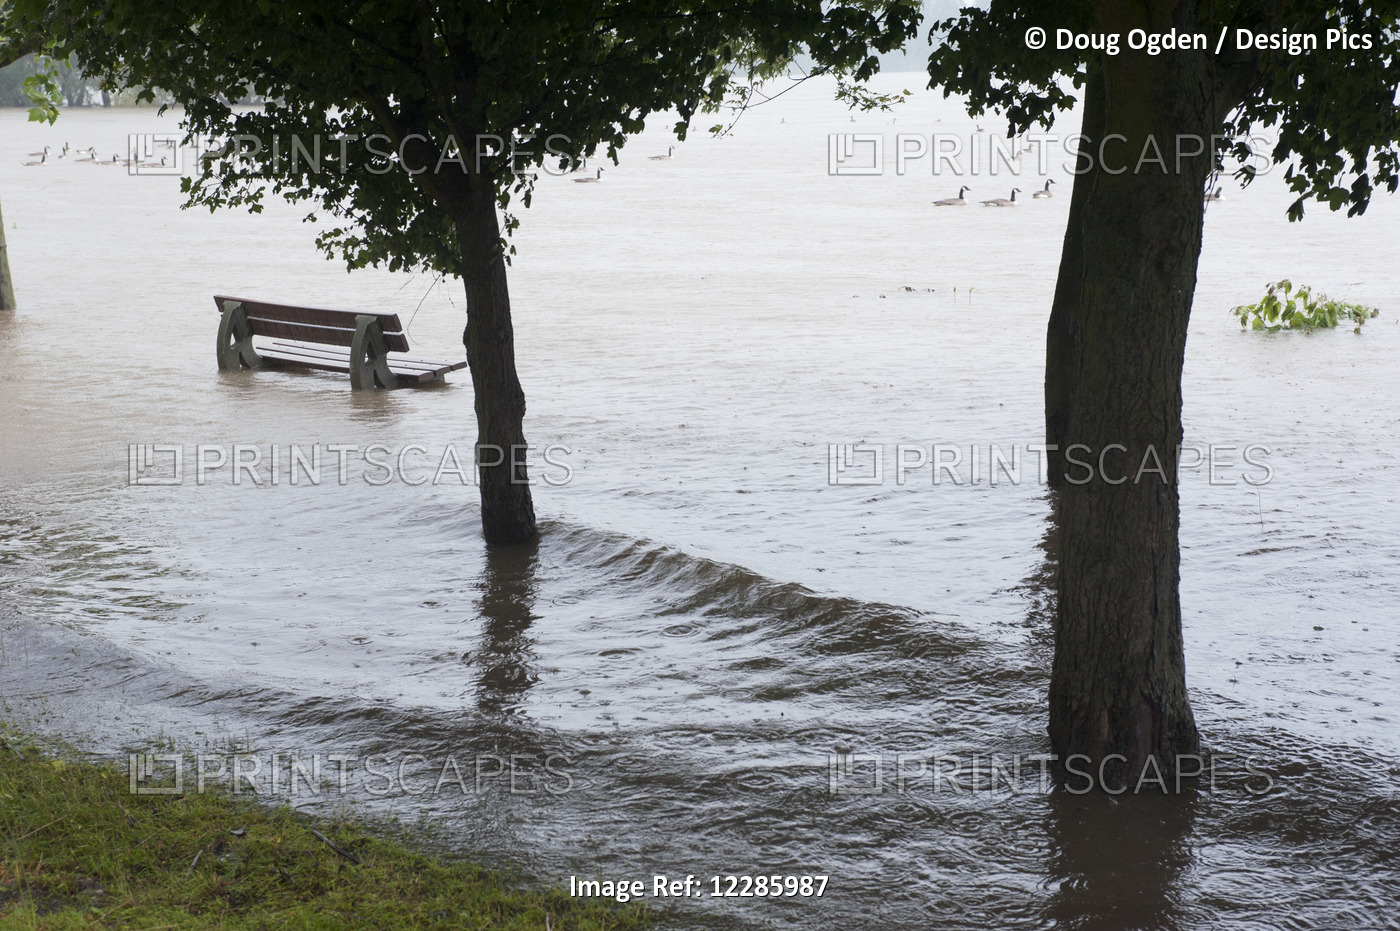 Spring Flooding Conditions On The Rhine River; Germany